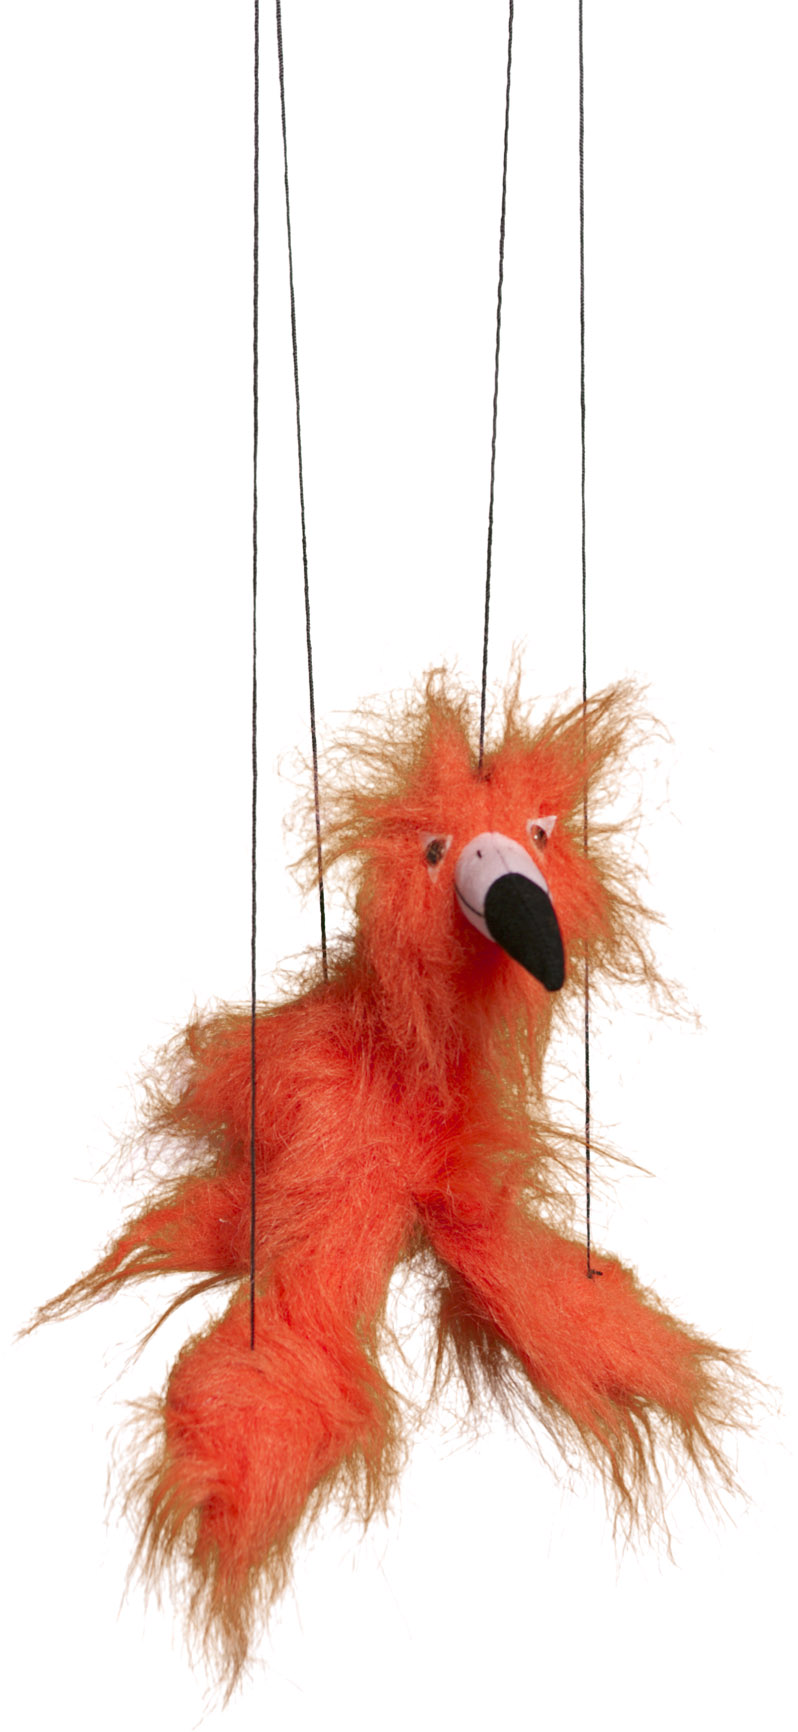 WB322 16 In. Baby Flamingo - Orange-Red, Marionette Puppet